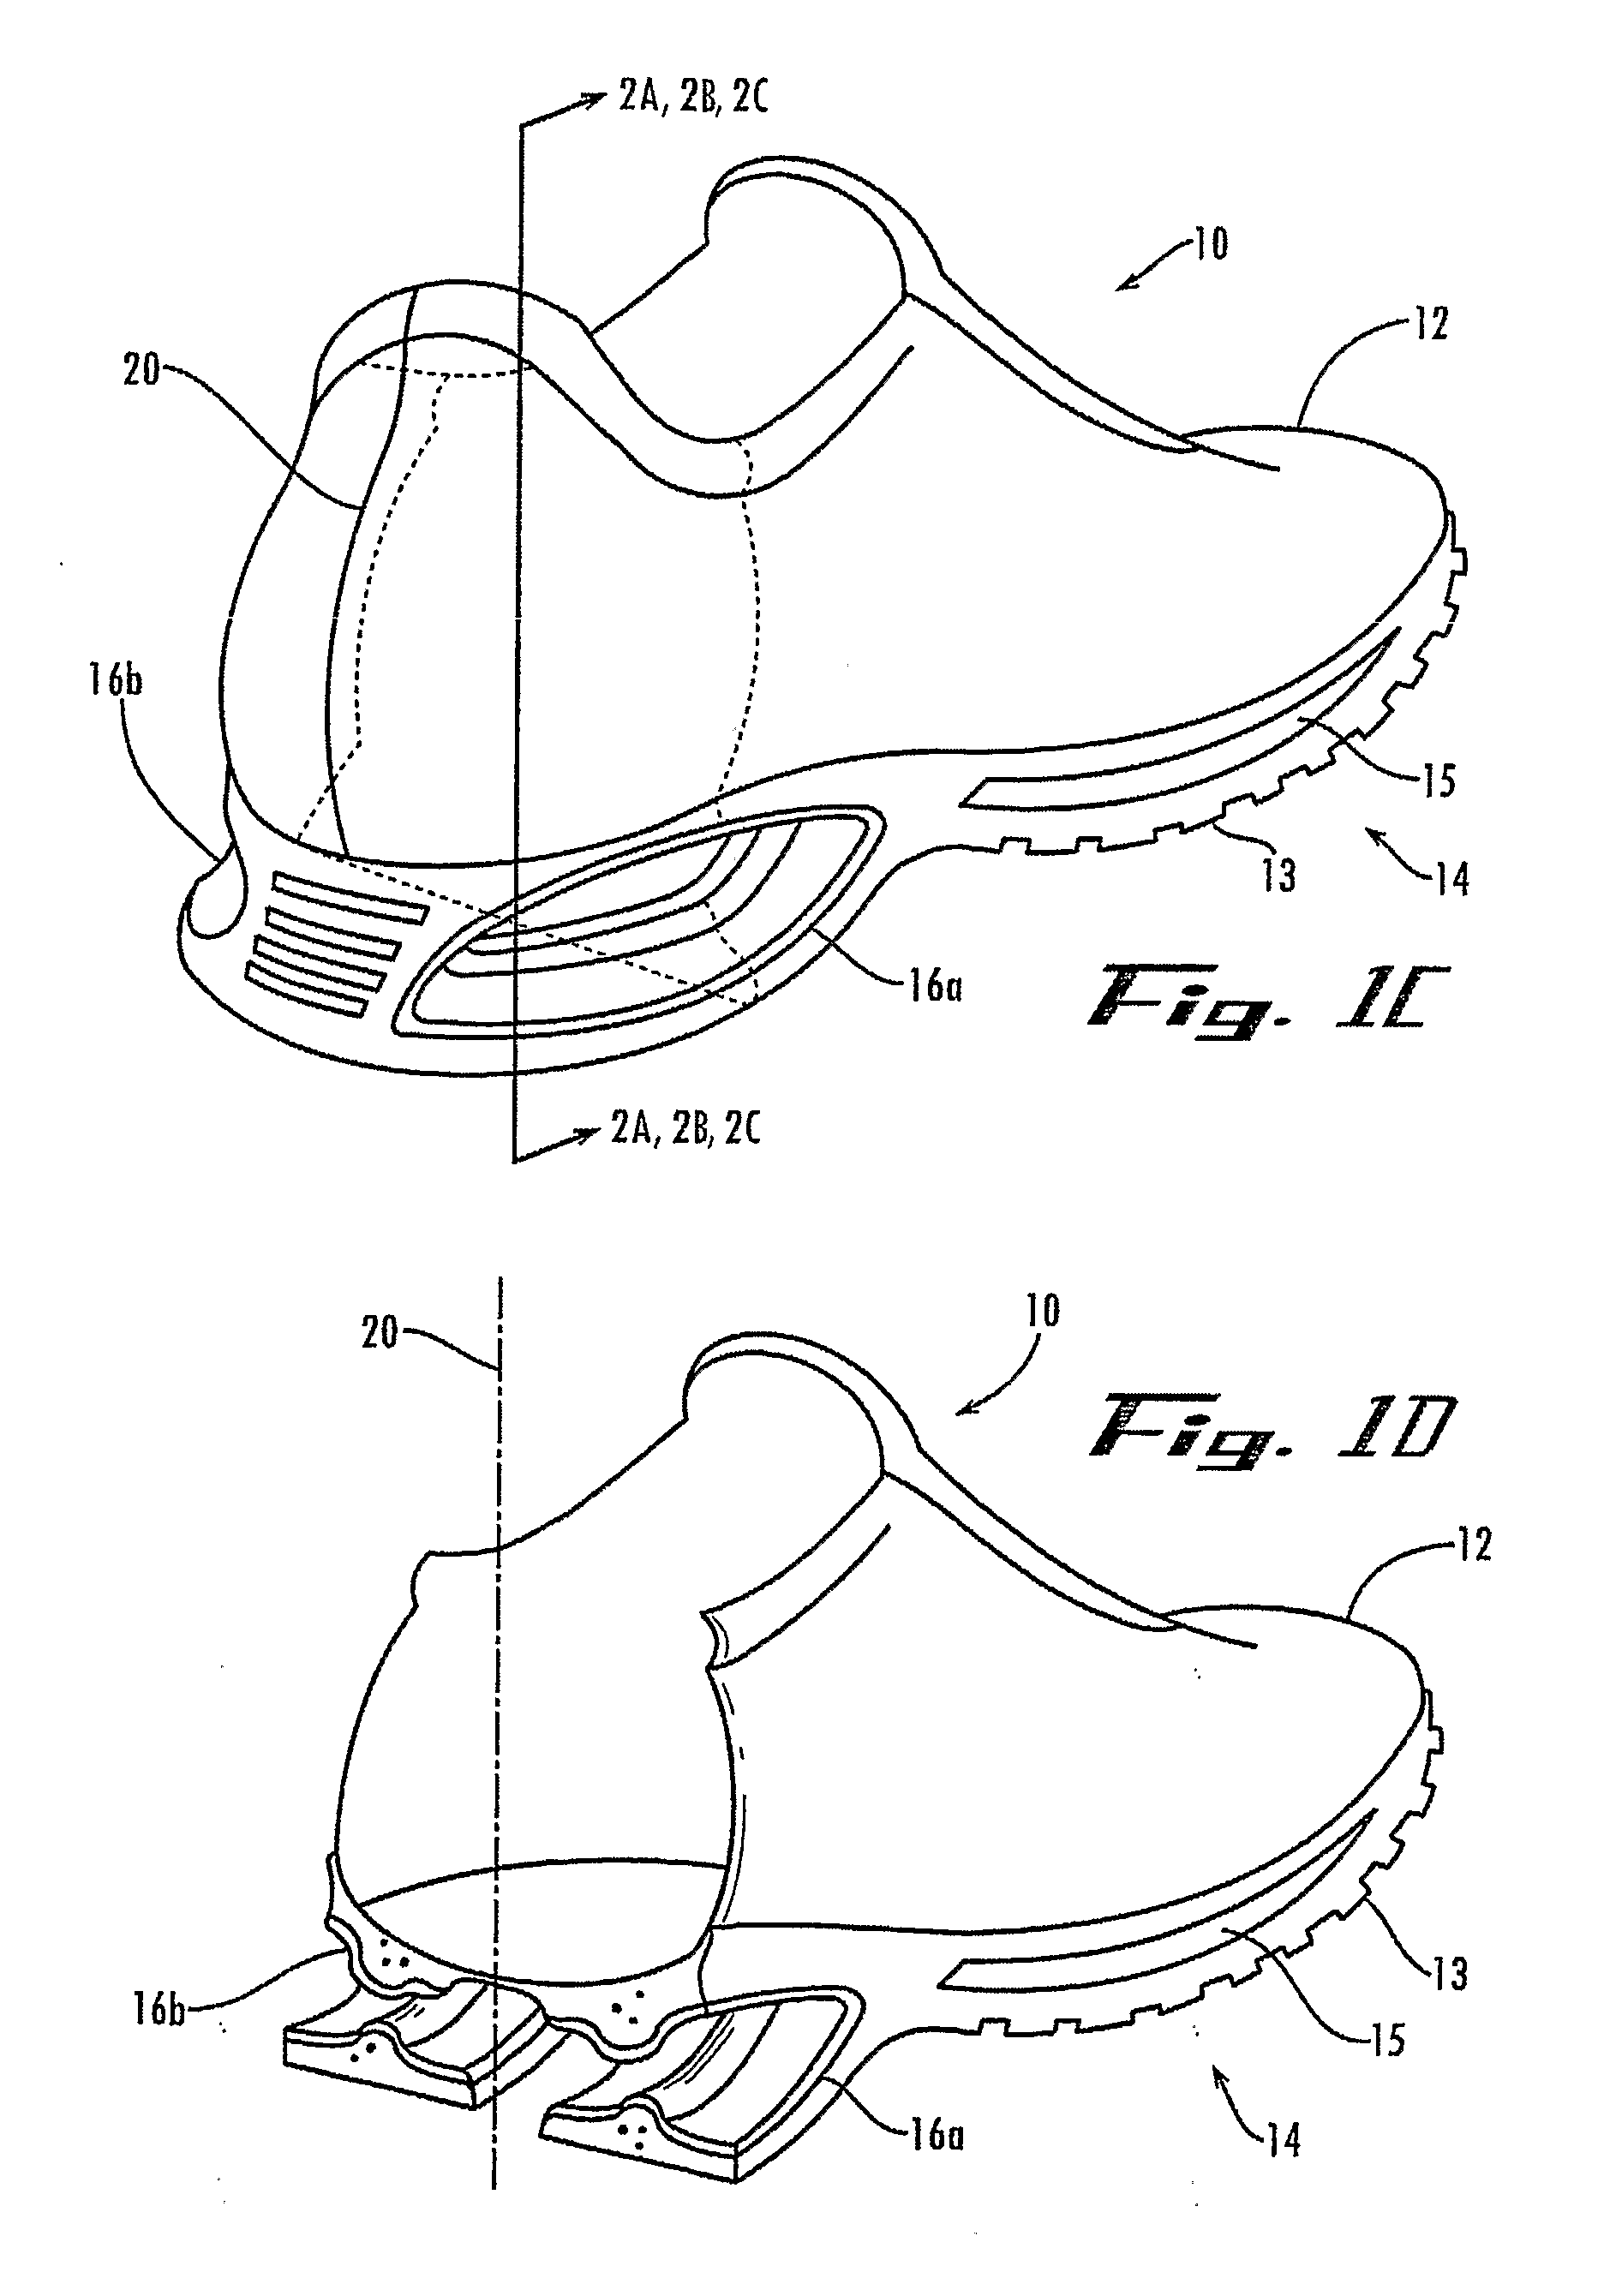 Sole Unit for Footwear and Footwear Incorporating Same